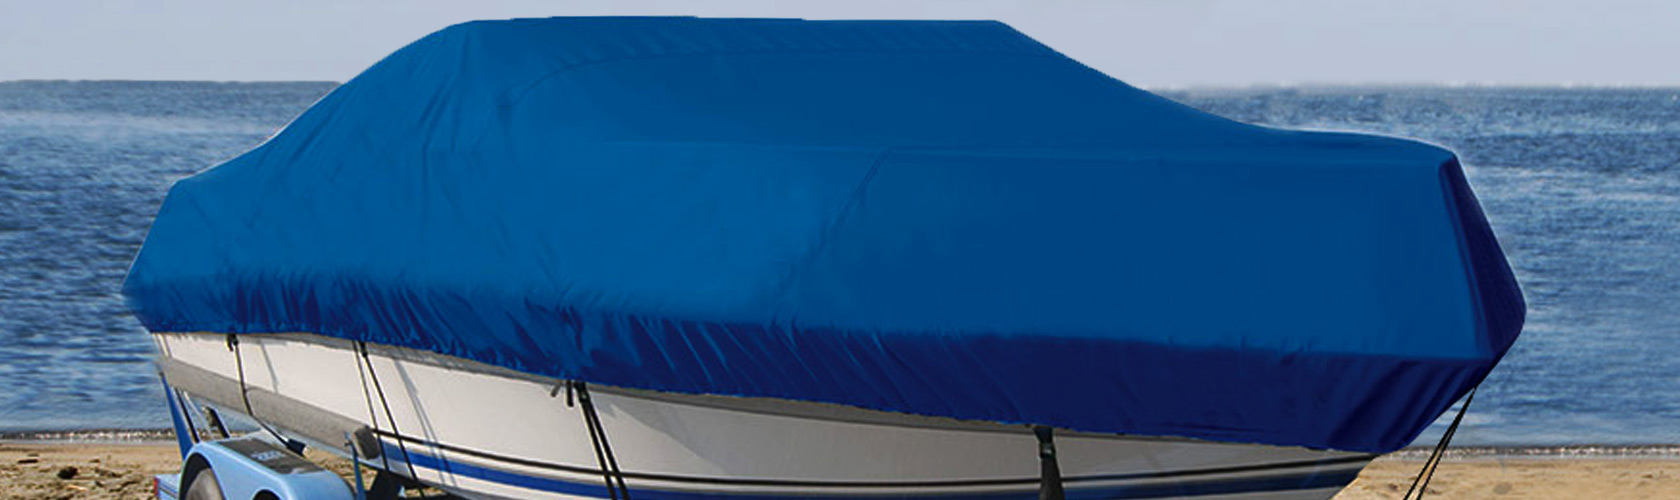 Motor Hood not Included Trailerite Semi-Custom Boat Cover for Day Cruiser Boats with Inboard/Outboard Motor 